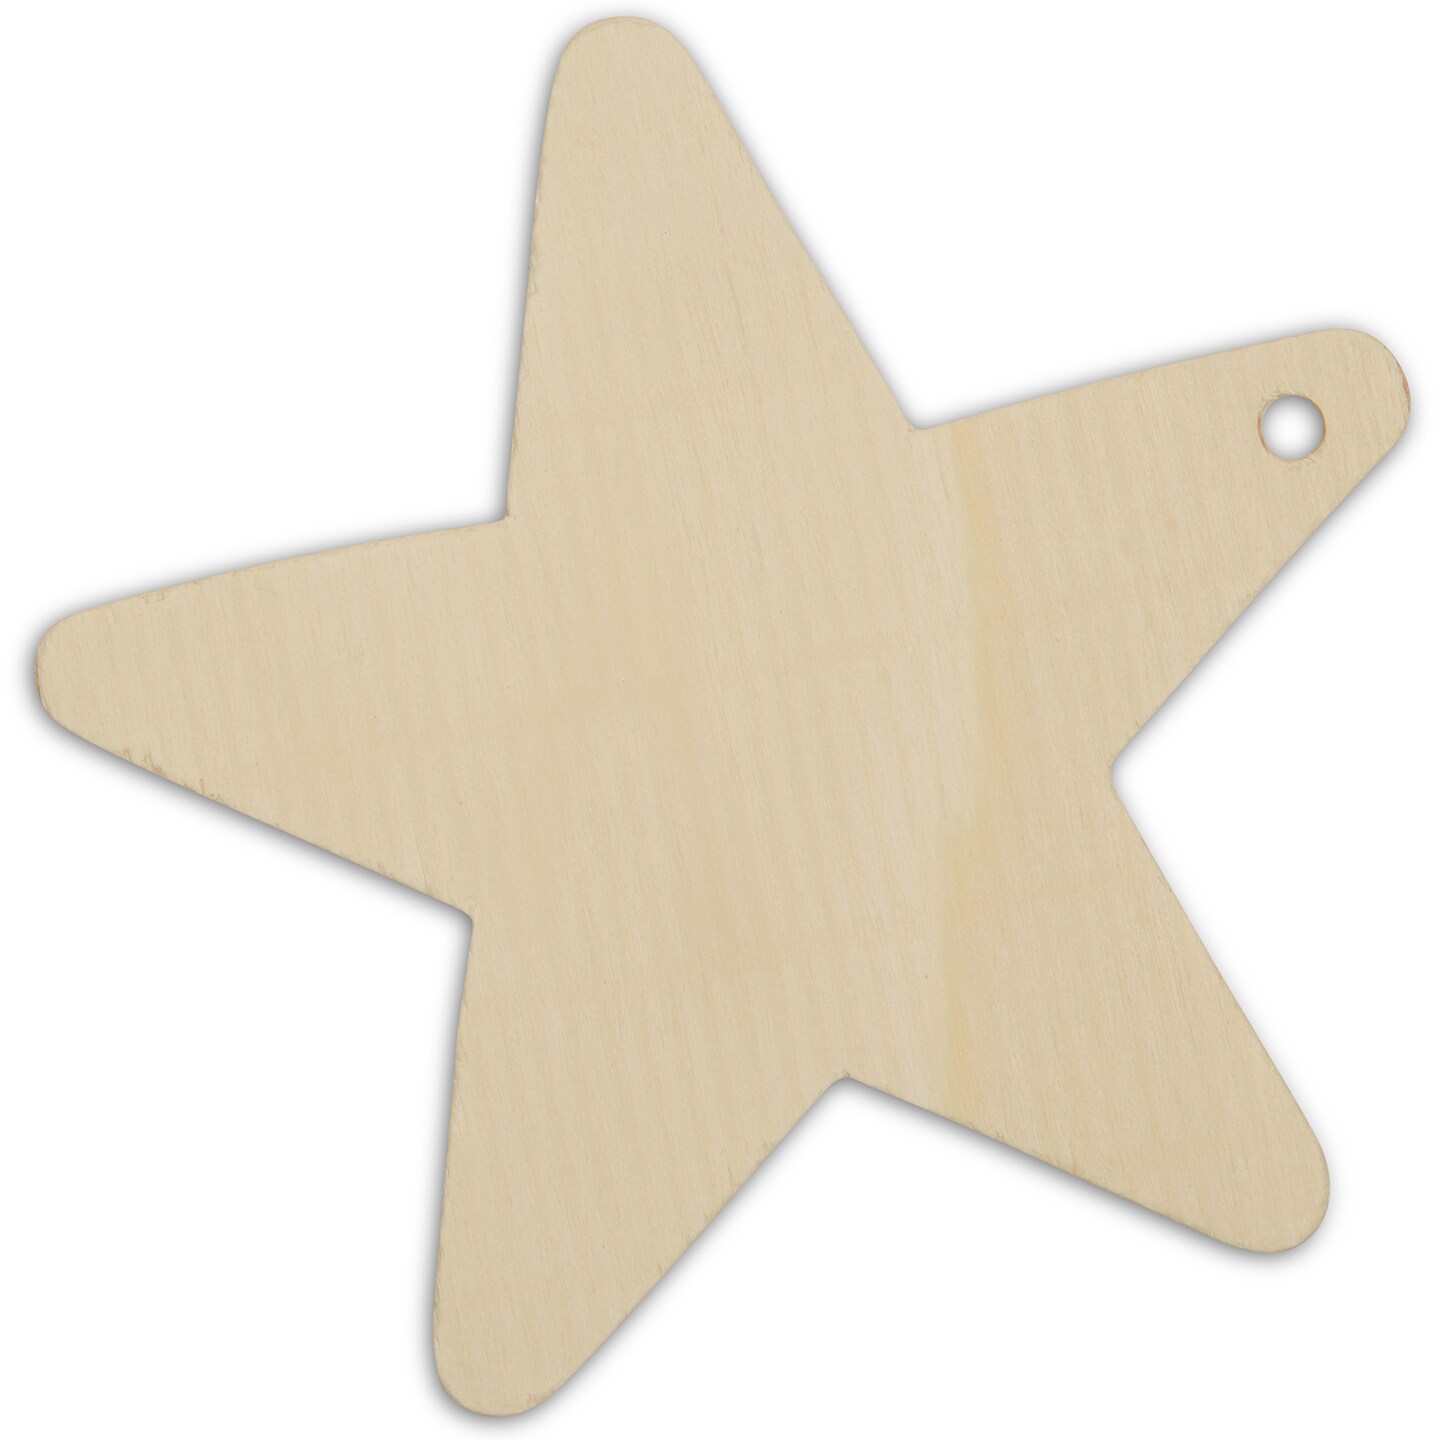 Wooden Star Christmas Tree Ornaments 4 inch, Unfinished, for Crafts|Woodpeckers